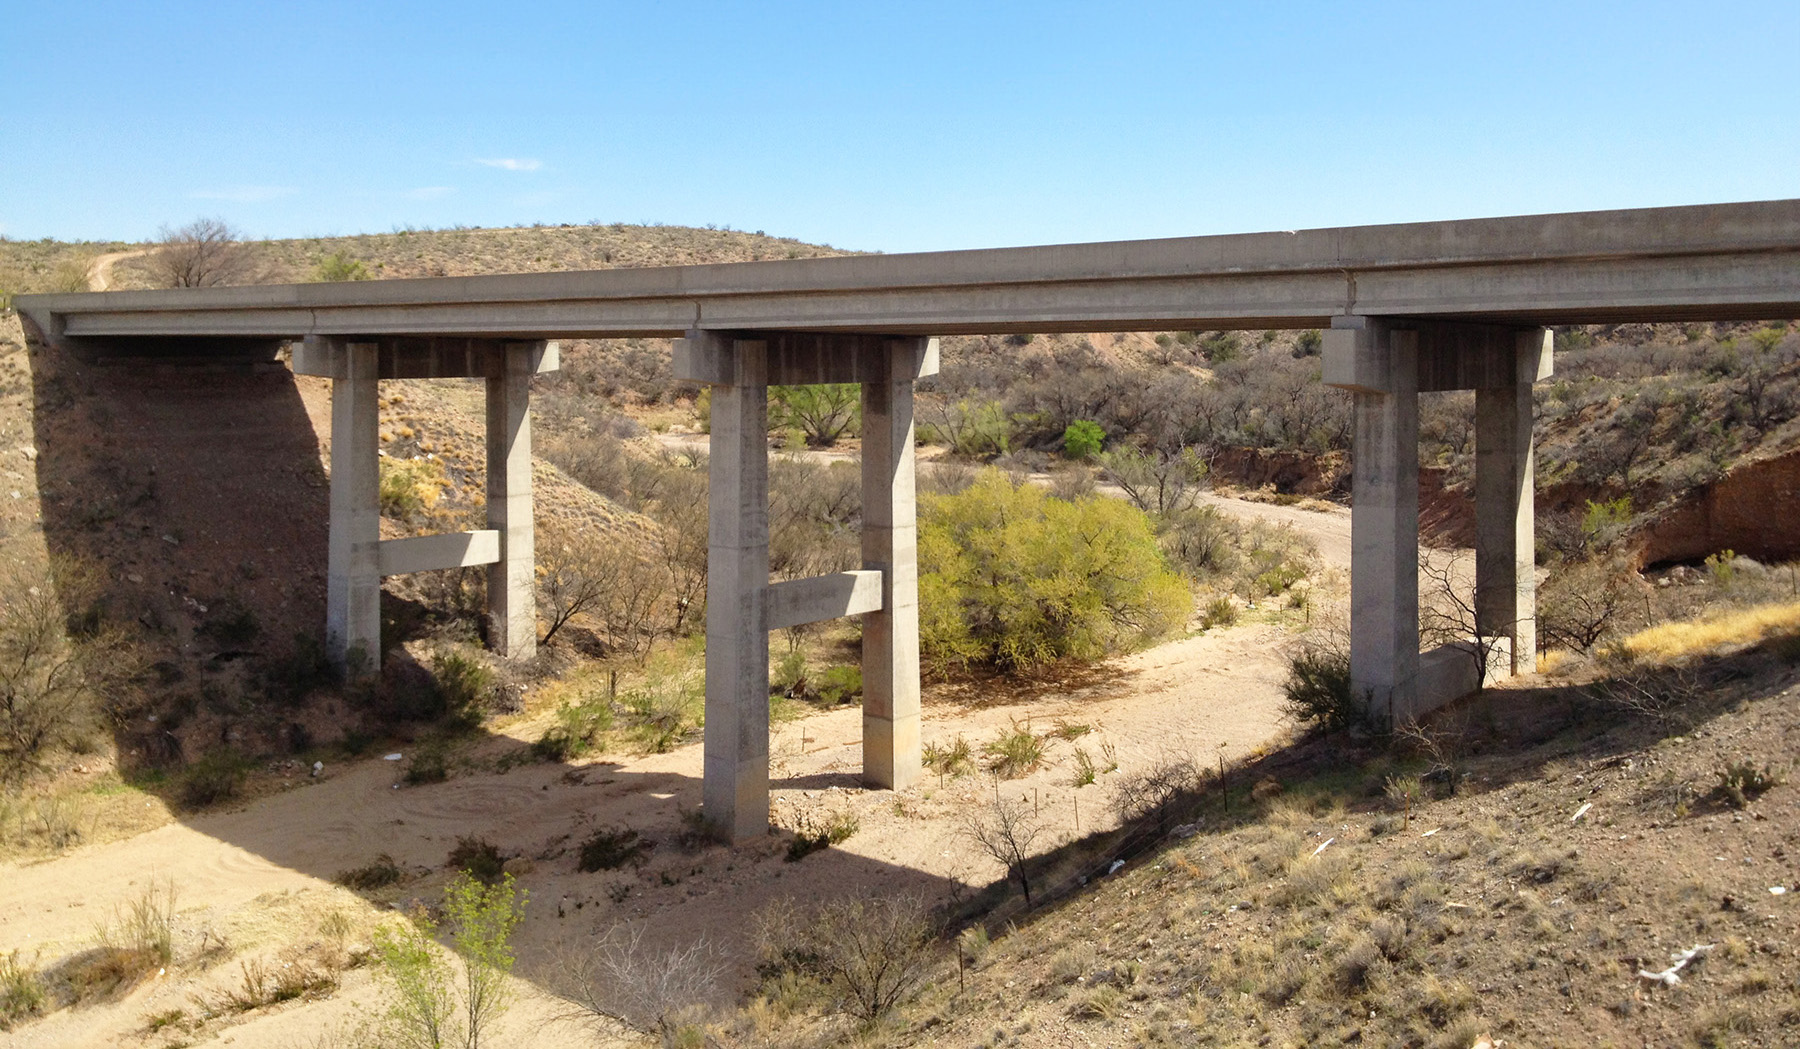 Image shows a bridge over a dry streambed. 